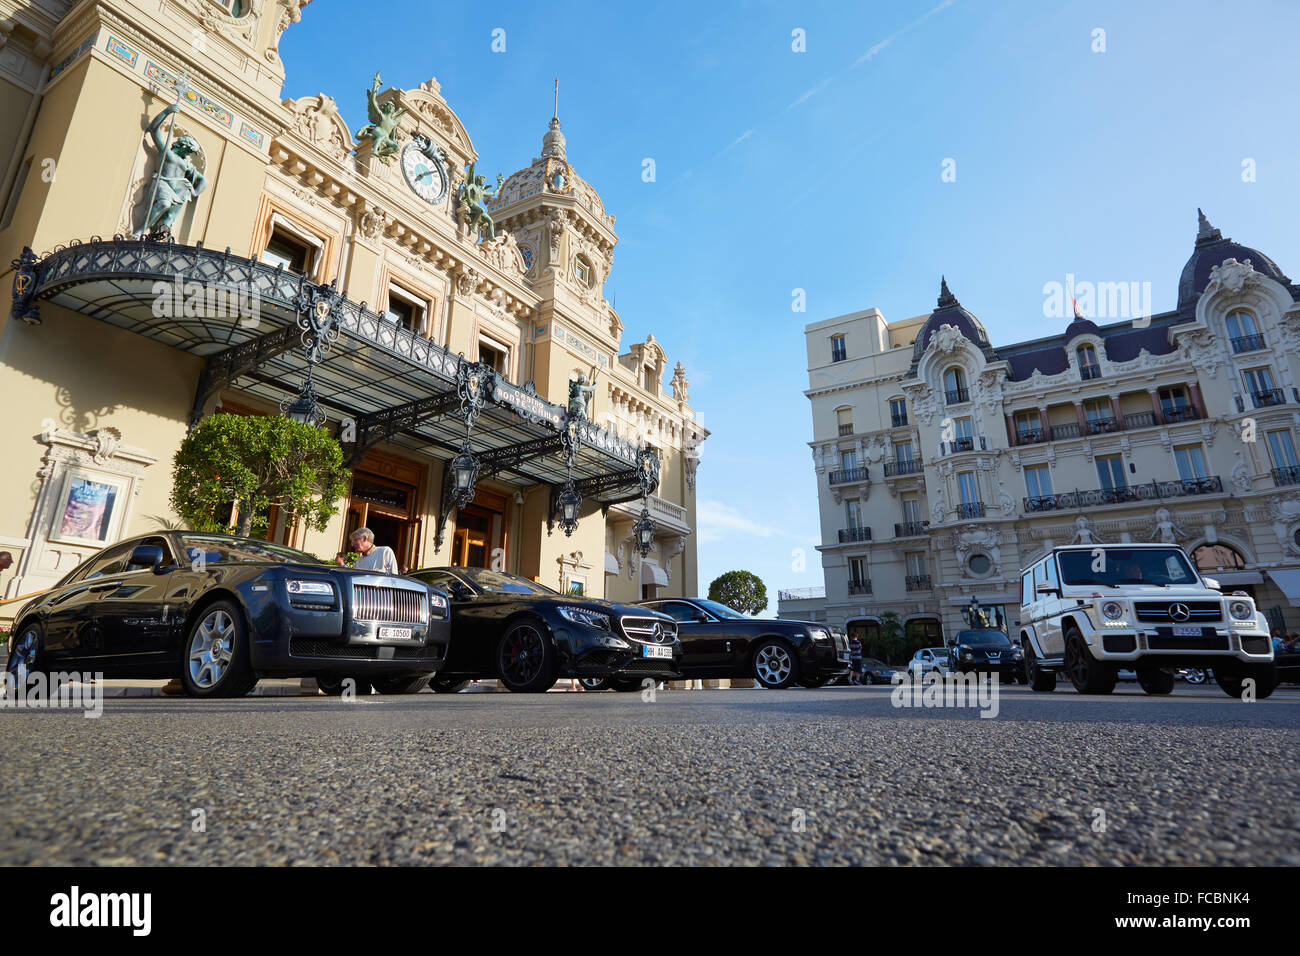 Grand Casino building and luxury cars in summer afternoon Stock Photo